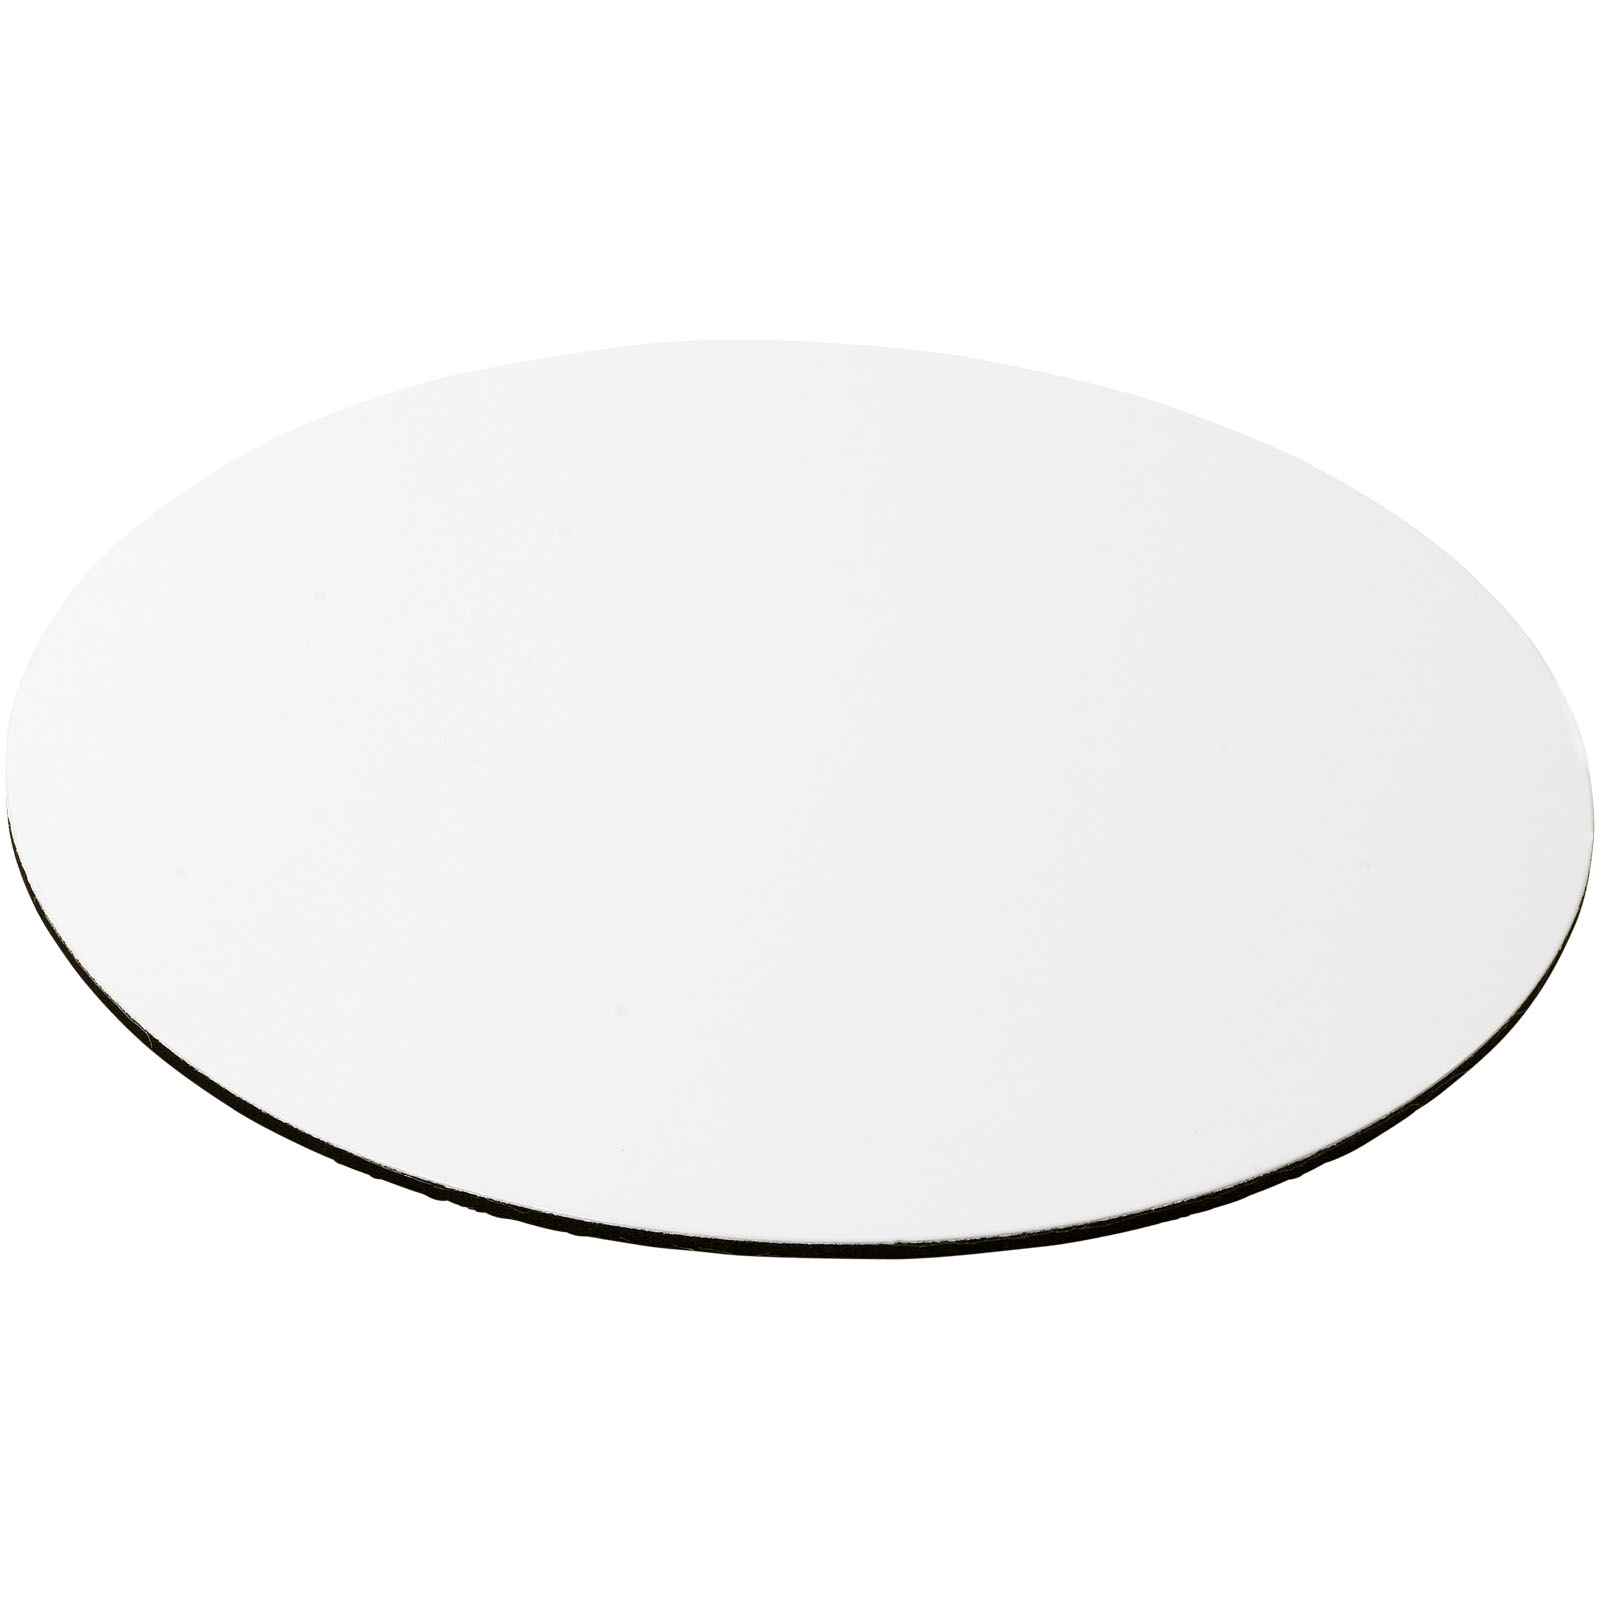 Advertising Computer Accessories - Q-Mat® round mouse mat - 3